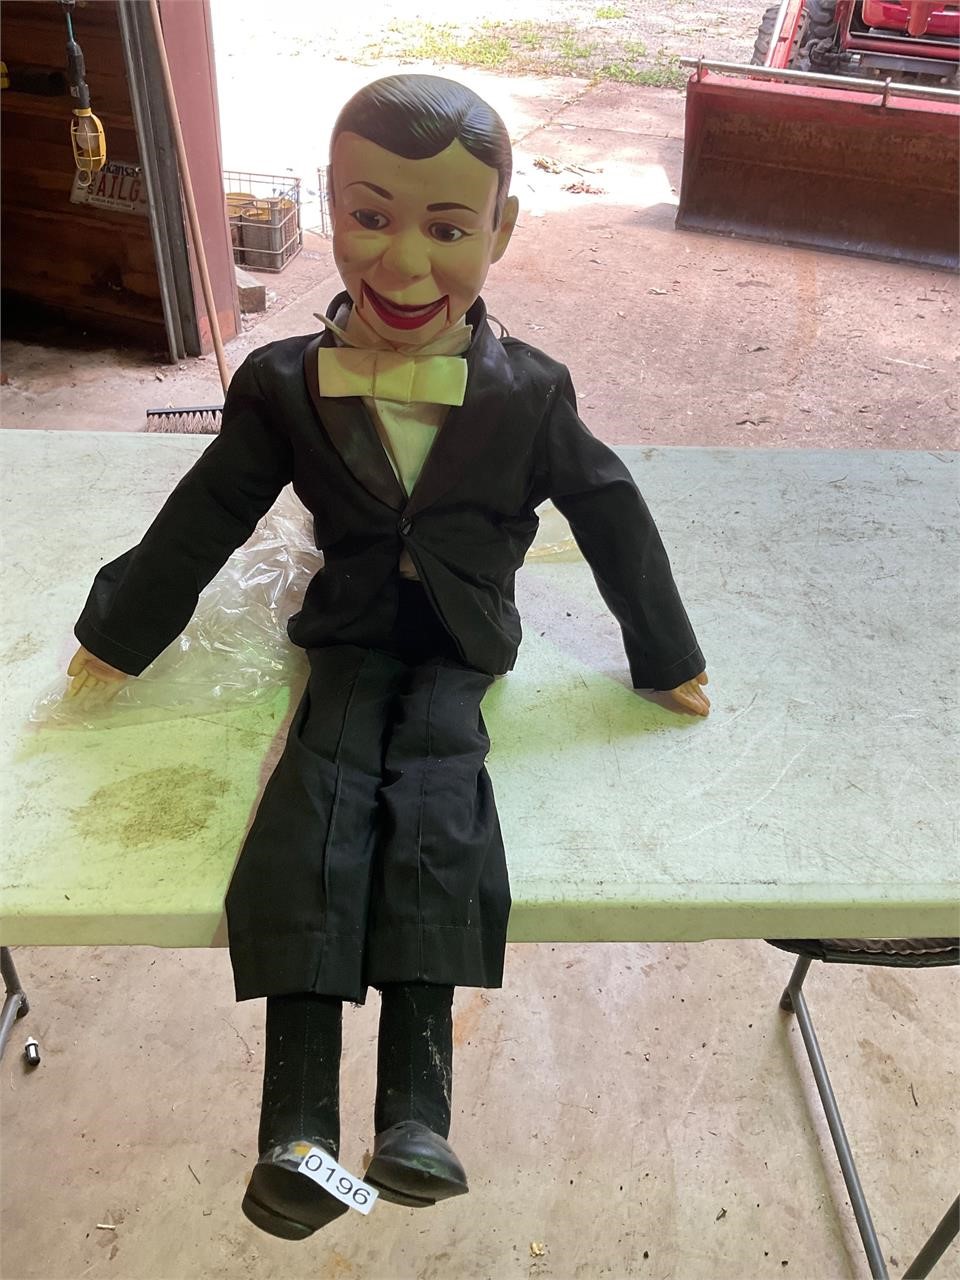 Ventriloquist Dummy / Auctioneer Dummy/ Many Uses